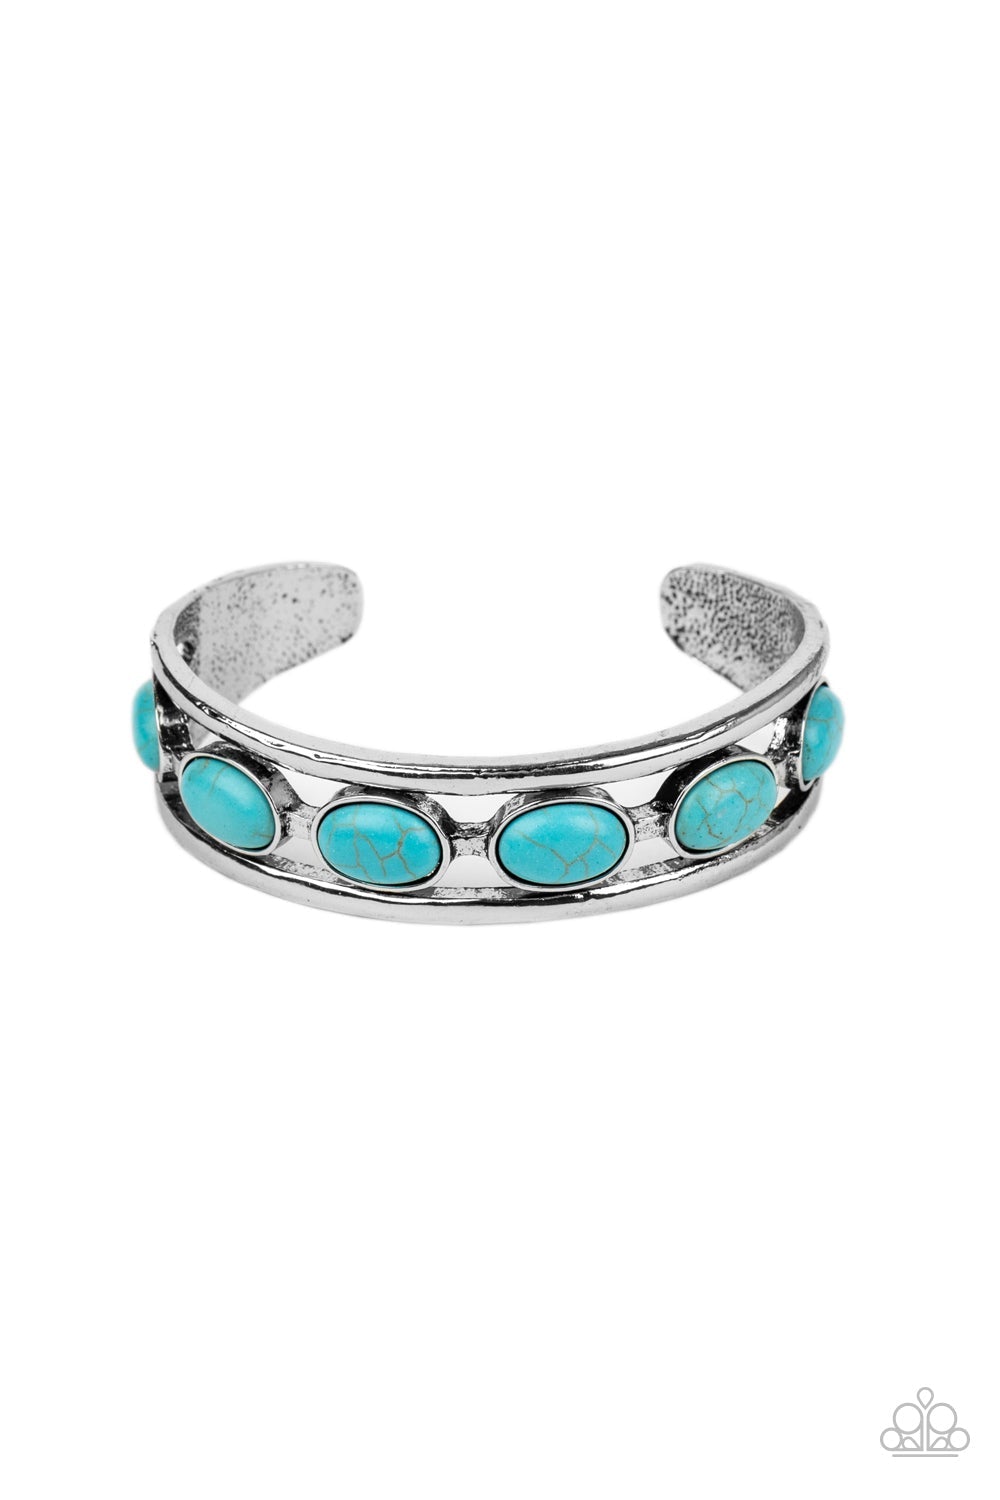 River Rock Canyons Turquoise Blue Cuff Bracelet - Paparazzi Accessories- lightbox - CarasShop.com - $5 Jewelry by Cara Jewels